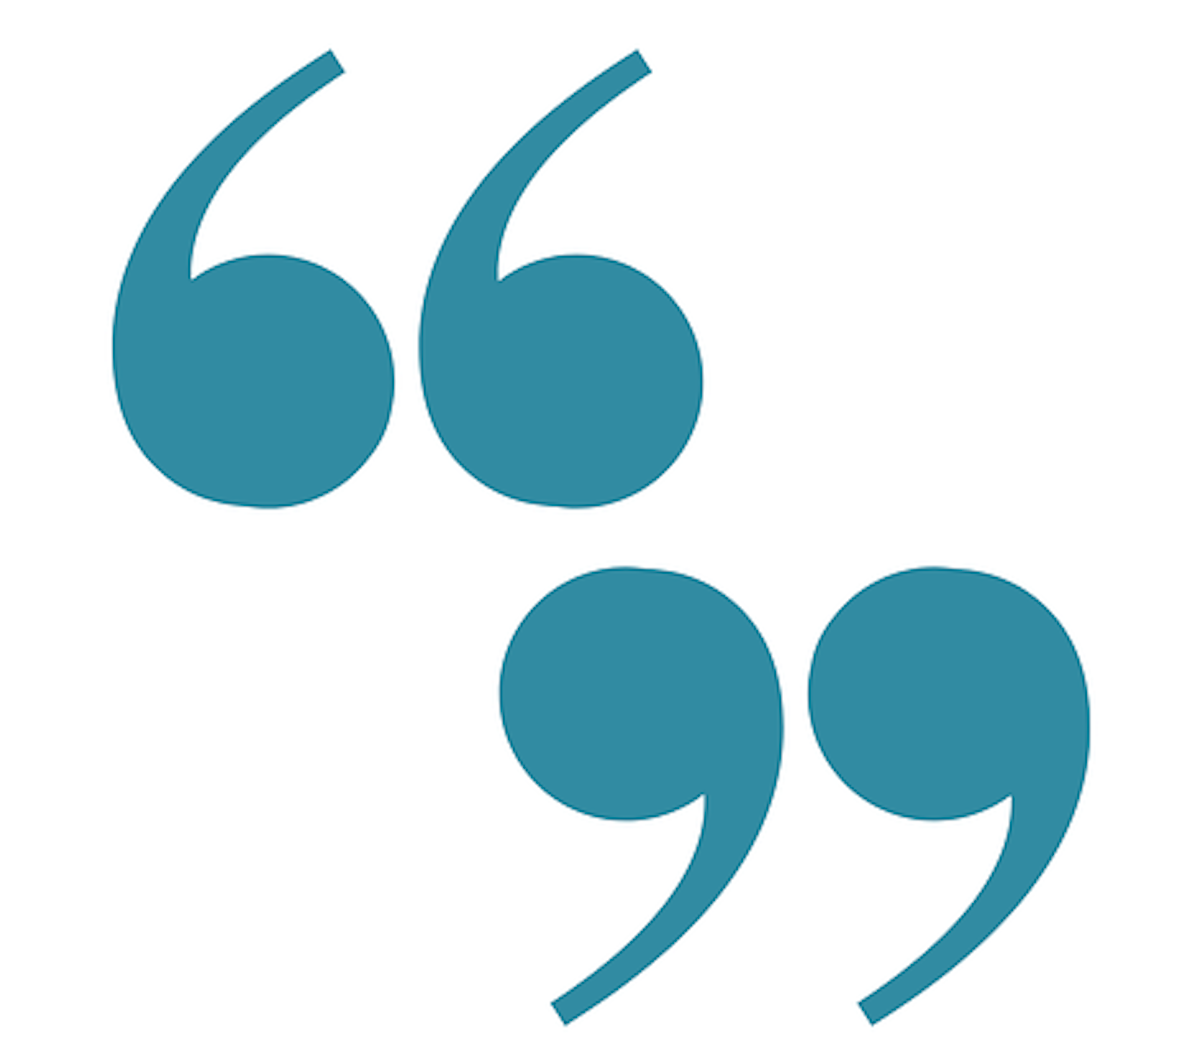 This minimalist design features two quotation marks or speech bubbles in a deep teal hue. The simple yet striking composition invites interpretation and contemplation on the power of communication and expression. This relates to the different uses of double quotation marks in British vs American English. 